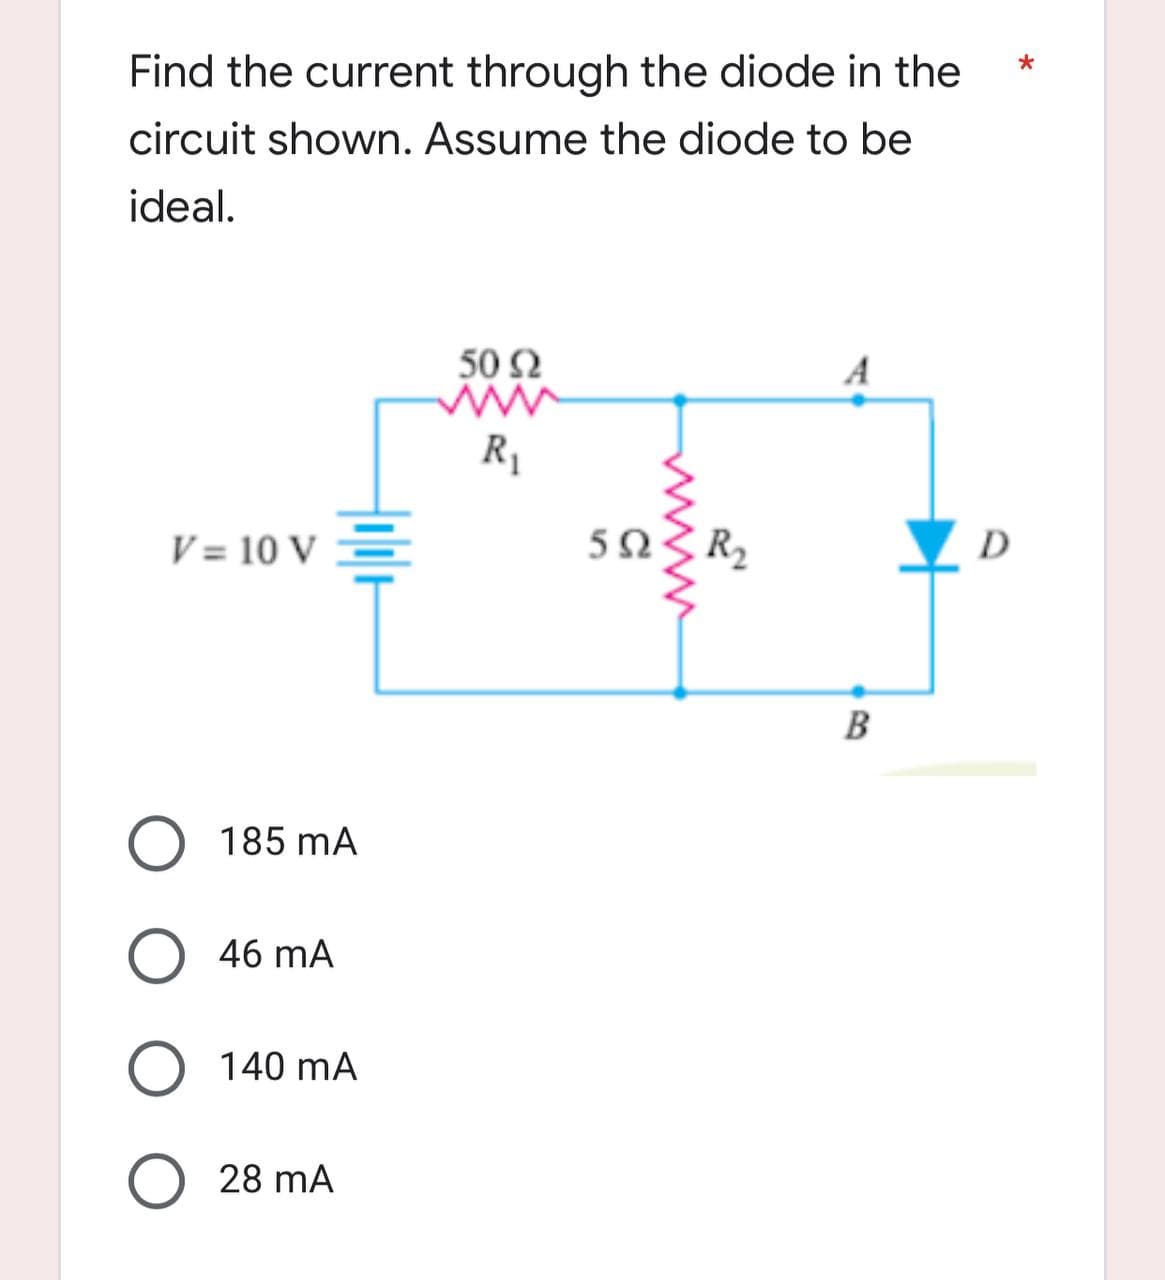 Find the current through the diode in the
circuit shown. Assume the diode to be
ideal.
50 92
www
R₁
D
V= 10 V =
O 185 mA
O 46 mA
O 140 mA
O 28 MA
592
wwww
R₂
B